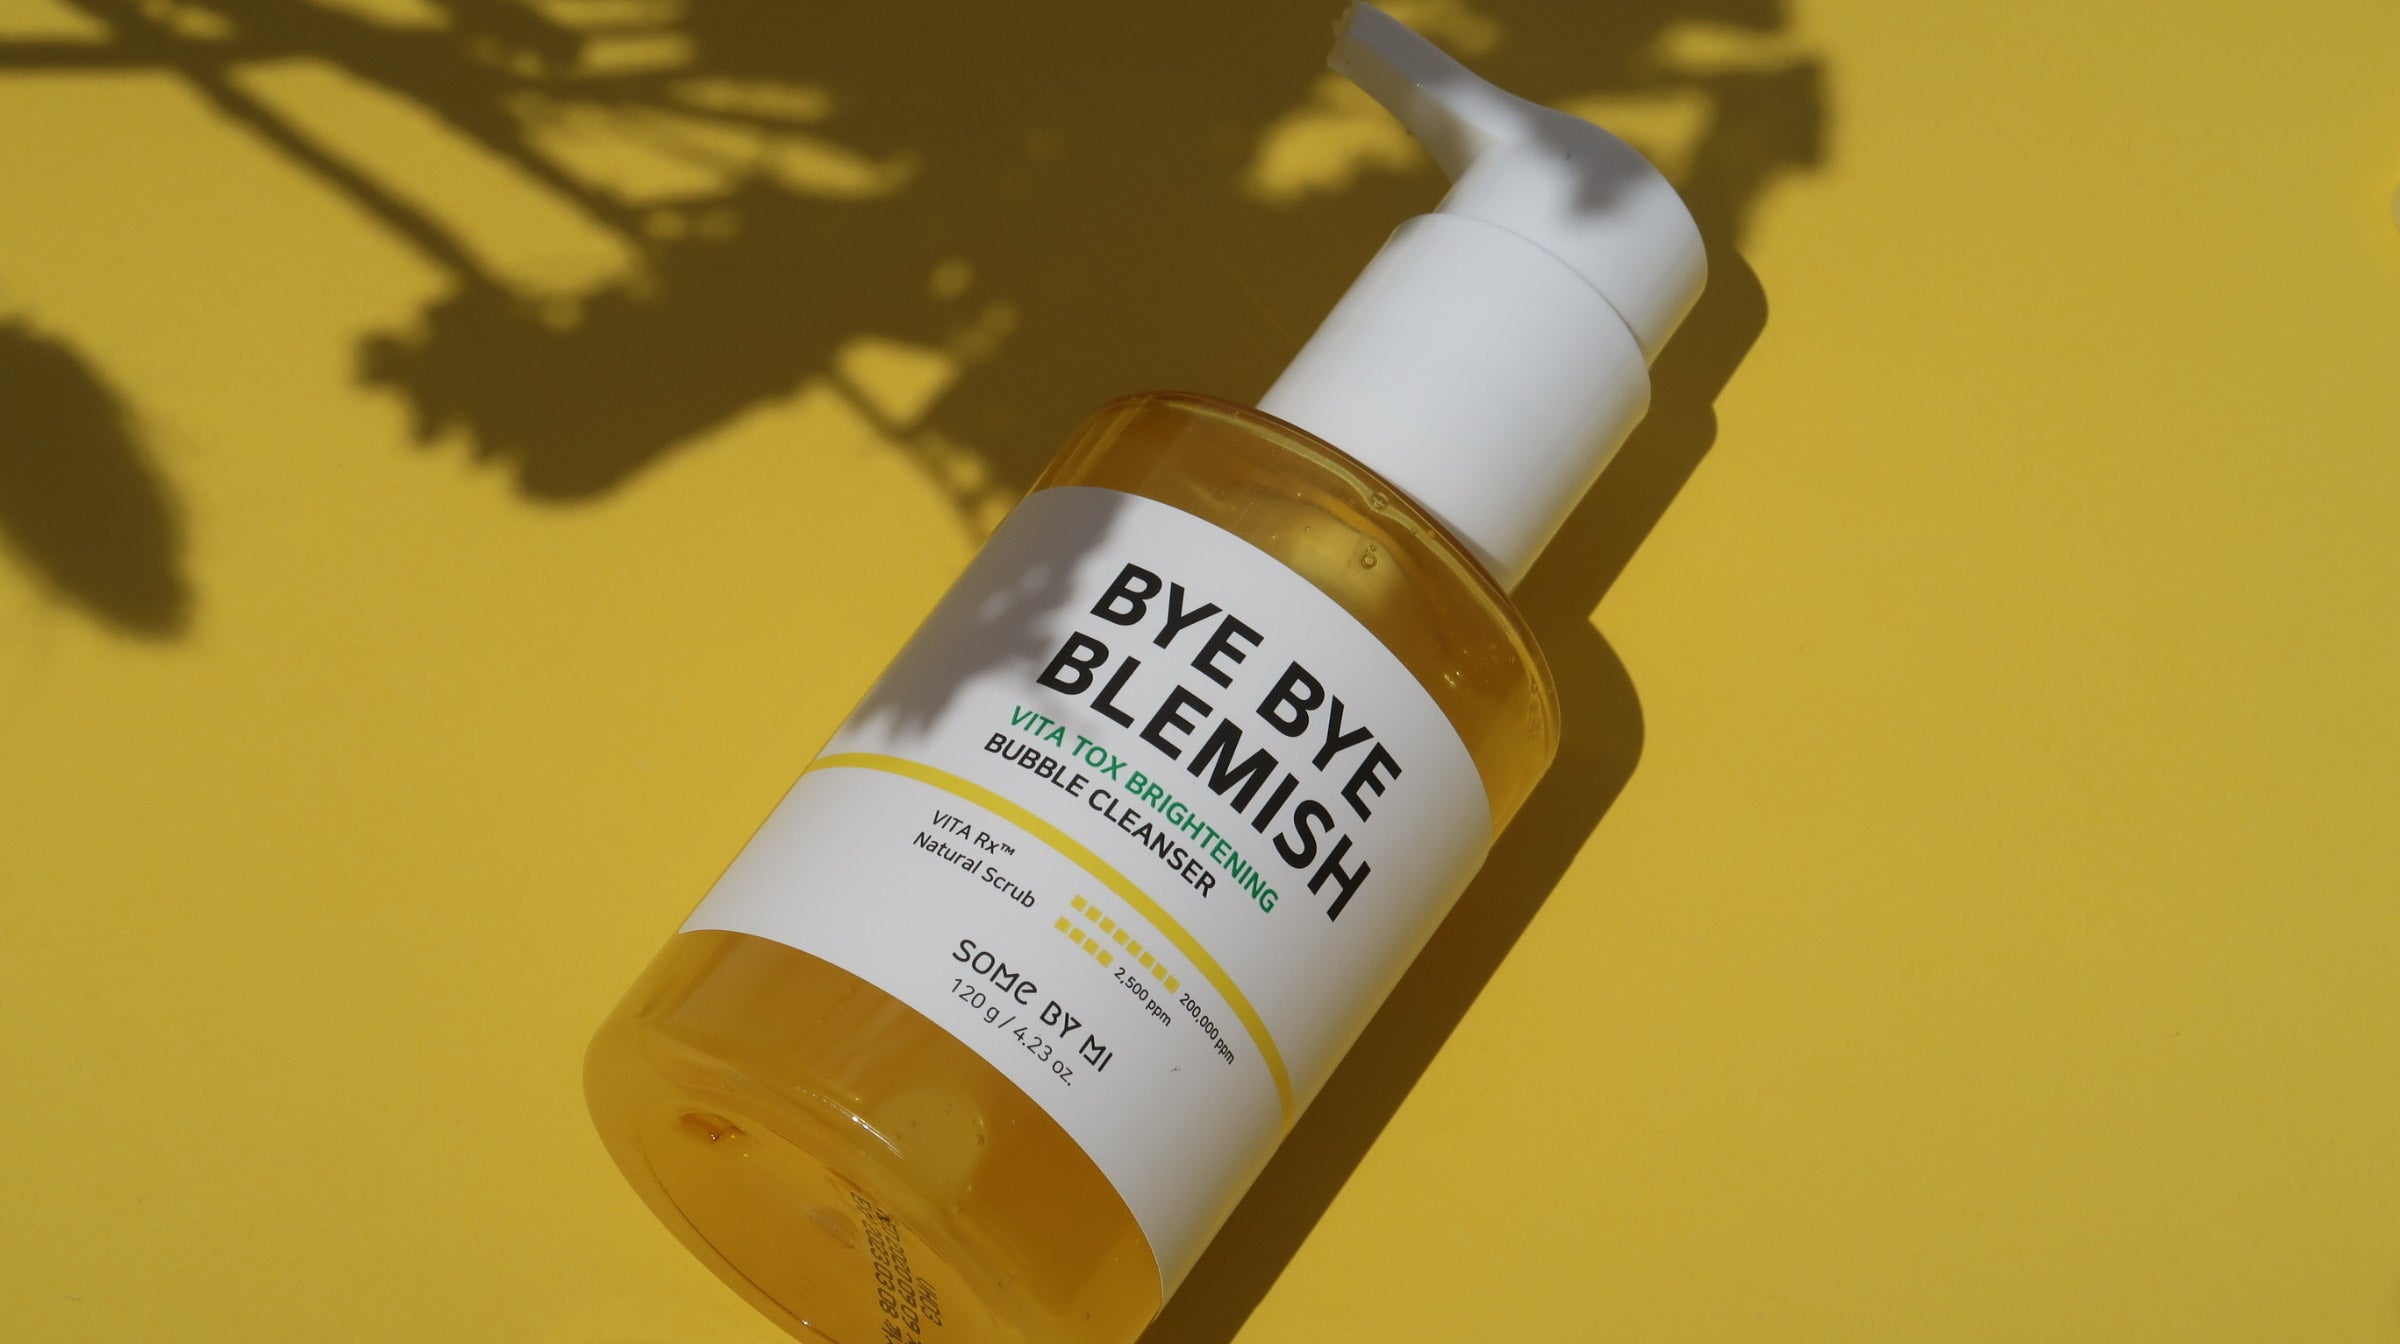 HI REVIEW: SOME BY MI Bye Bye Blemish Vita Tox Brightening Bubble Cleanser